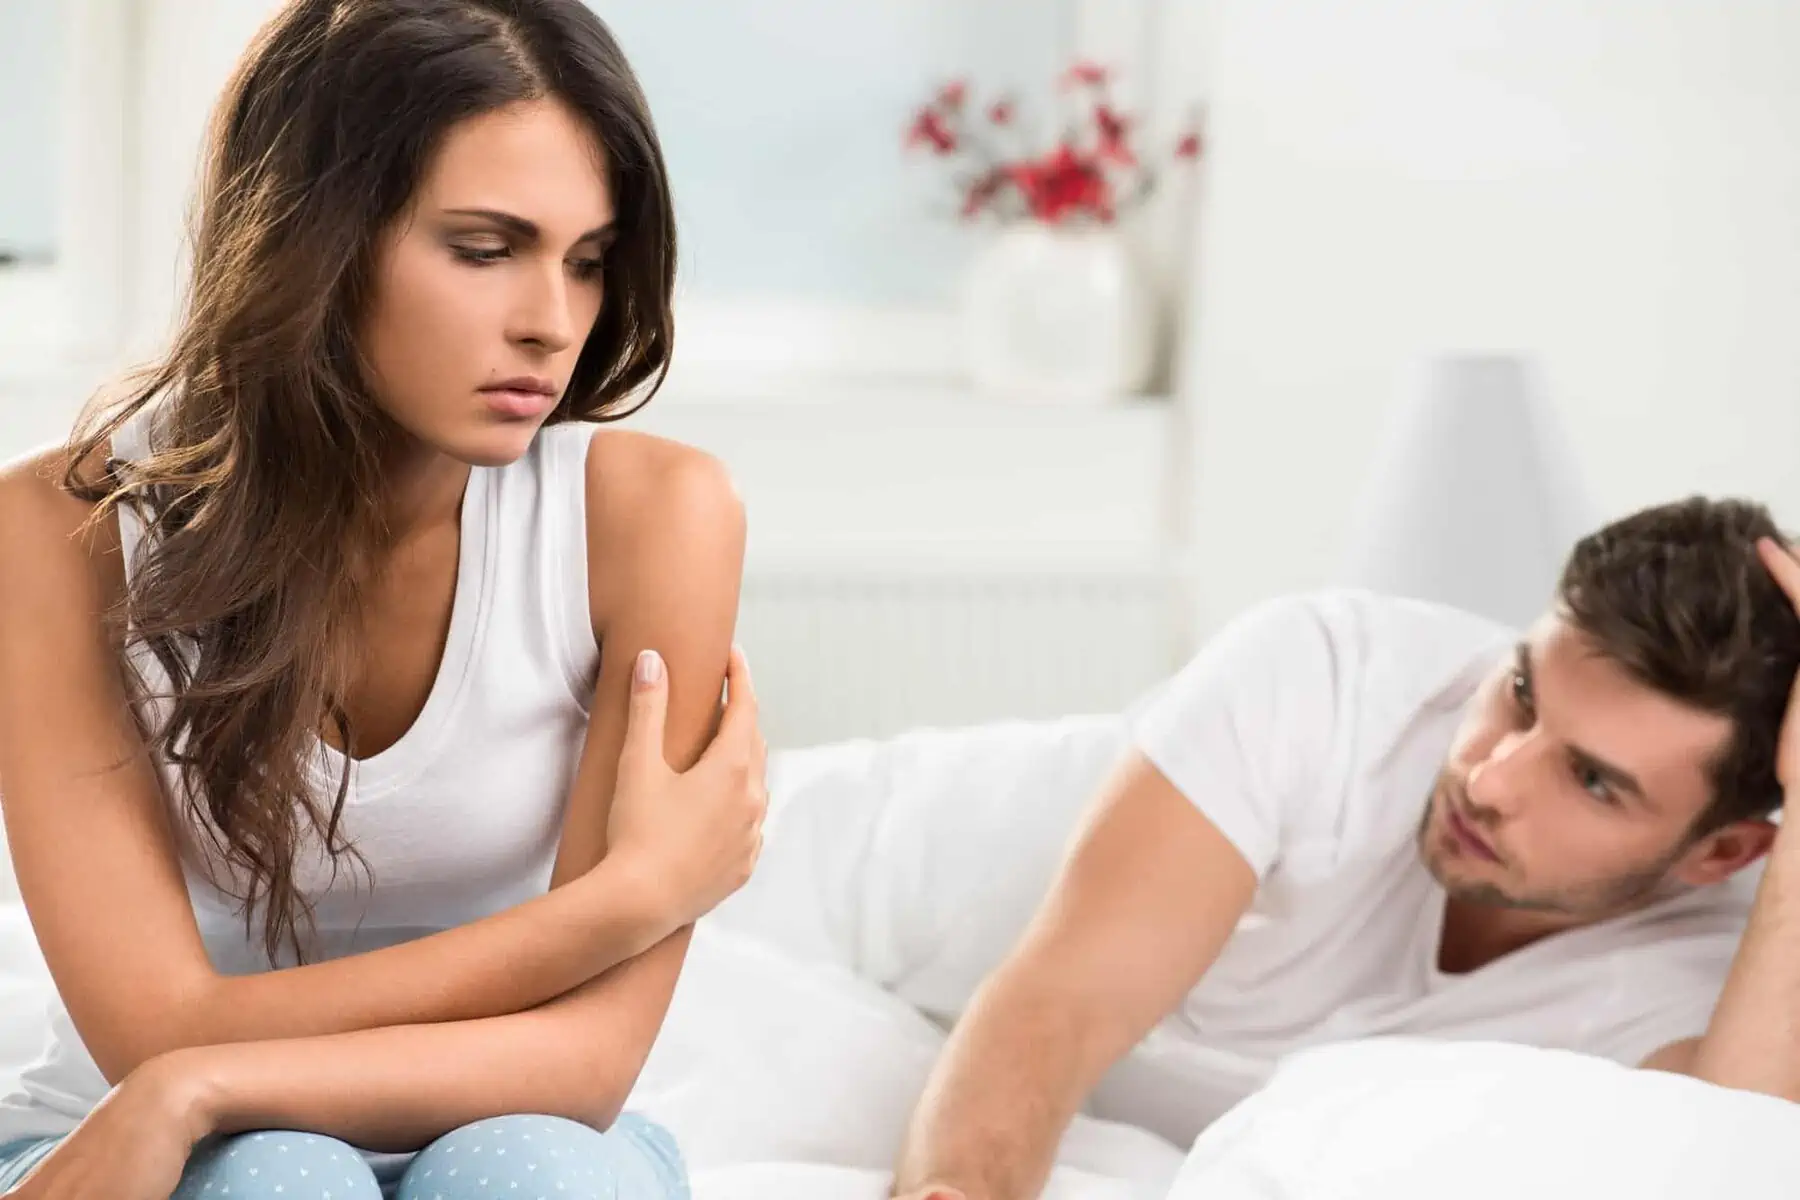 Should I Break Up With My Boyfriend? Our Quiz Will Help You Work It Out